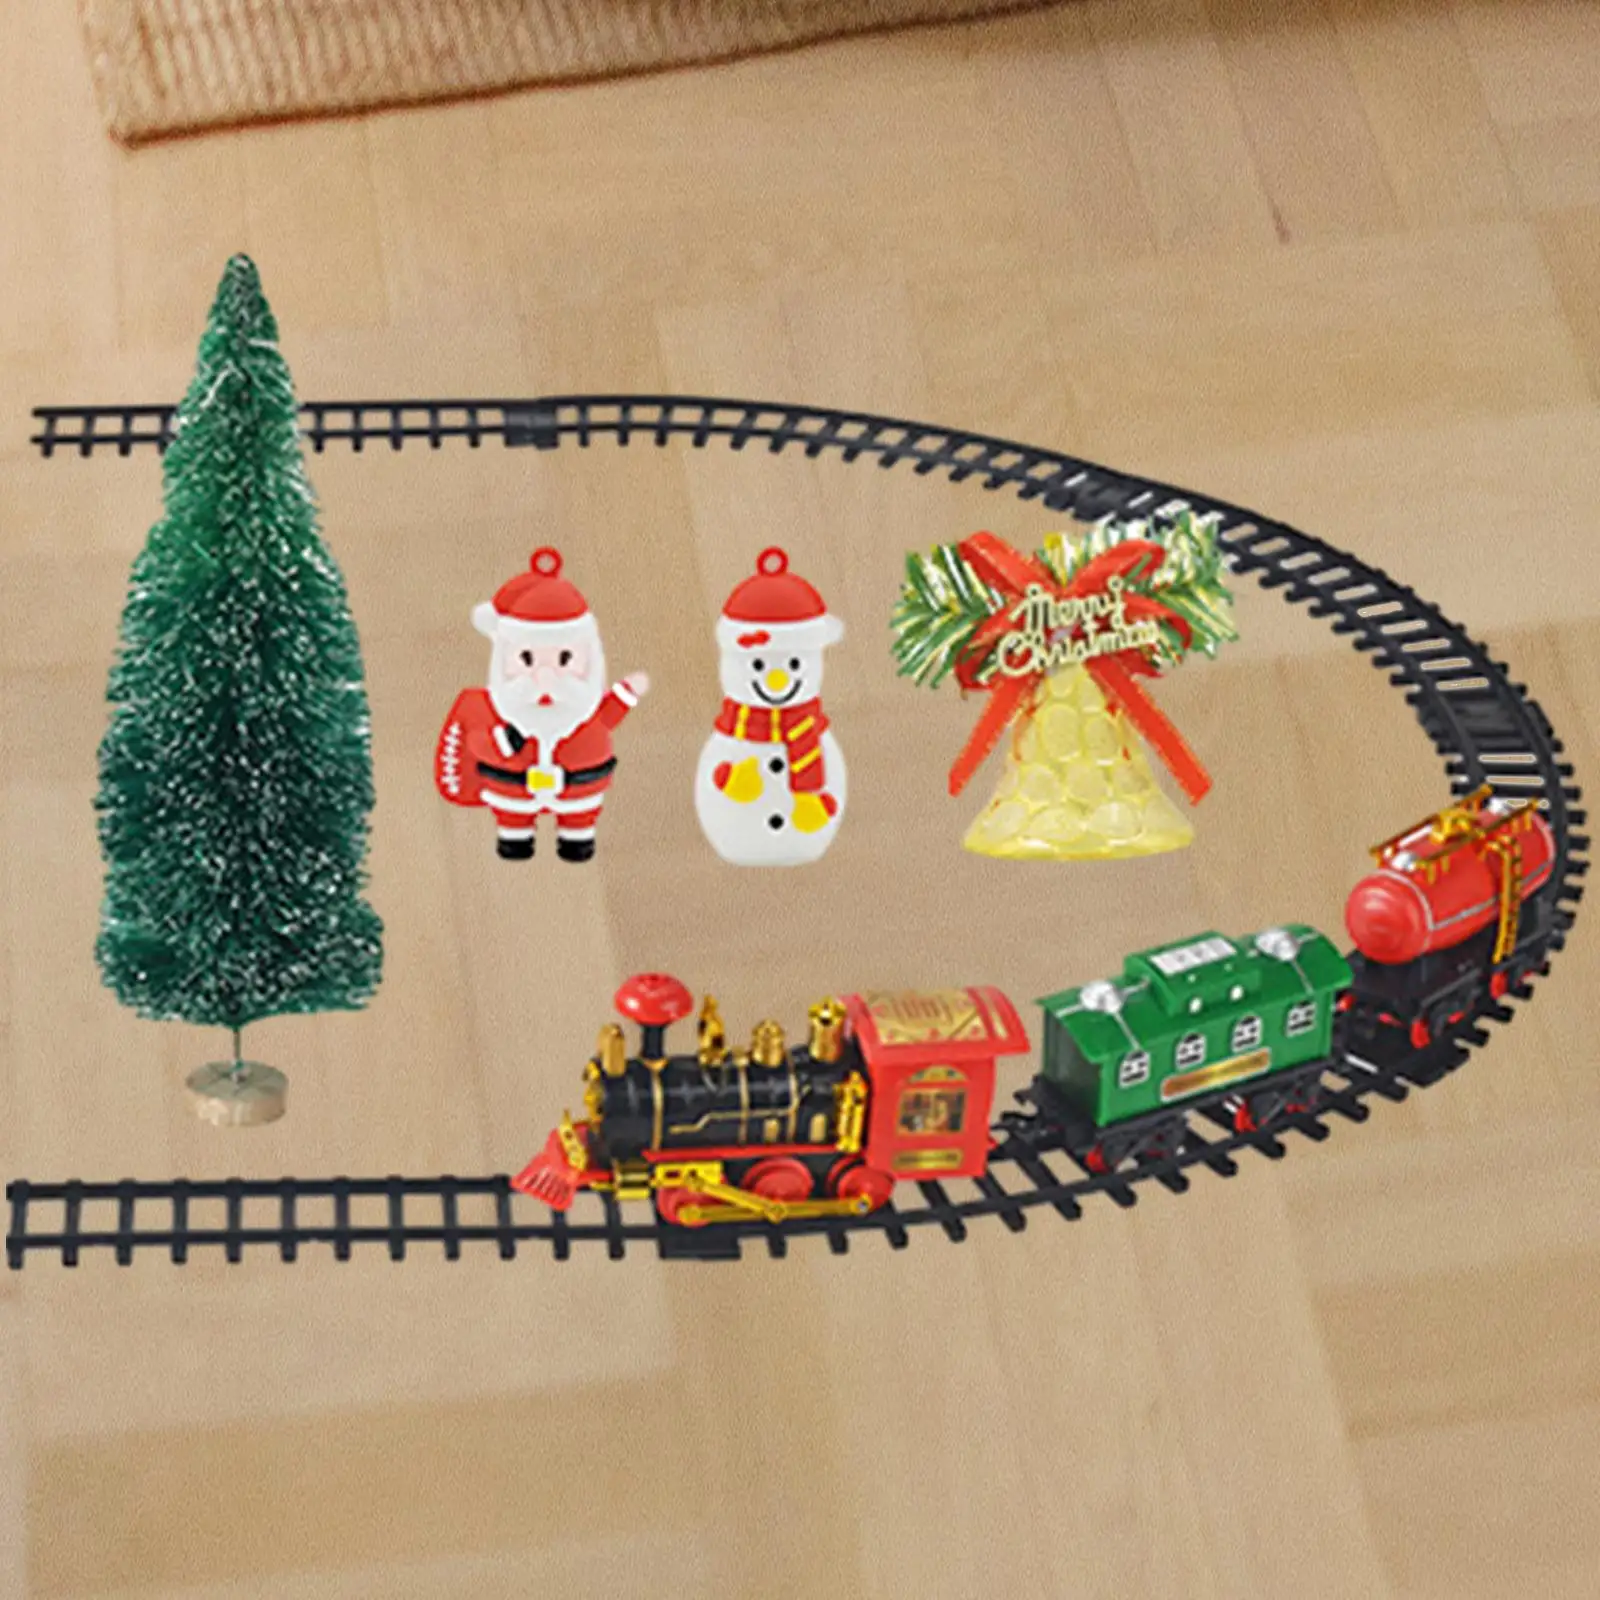 Electric Train Set Christmas Train DIY with Light & Sound Toys Decoration Small Trains Track for Children Girls Boys Gifts